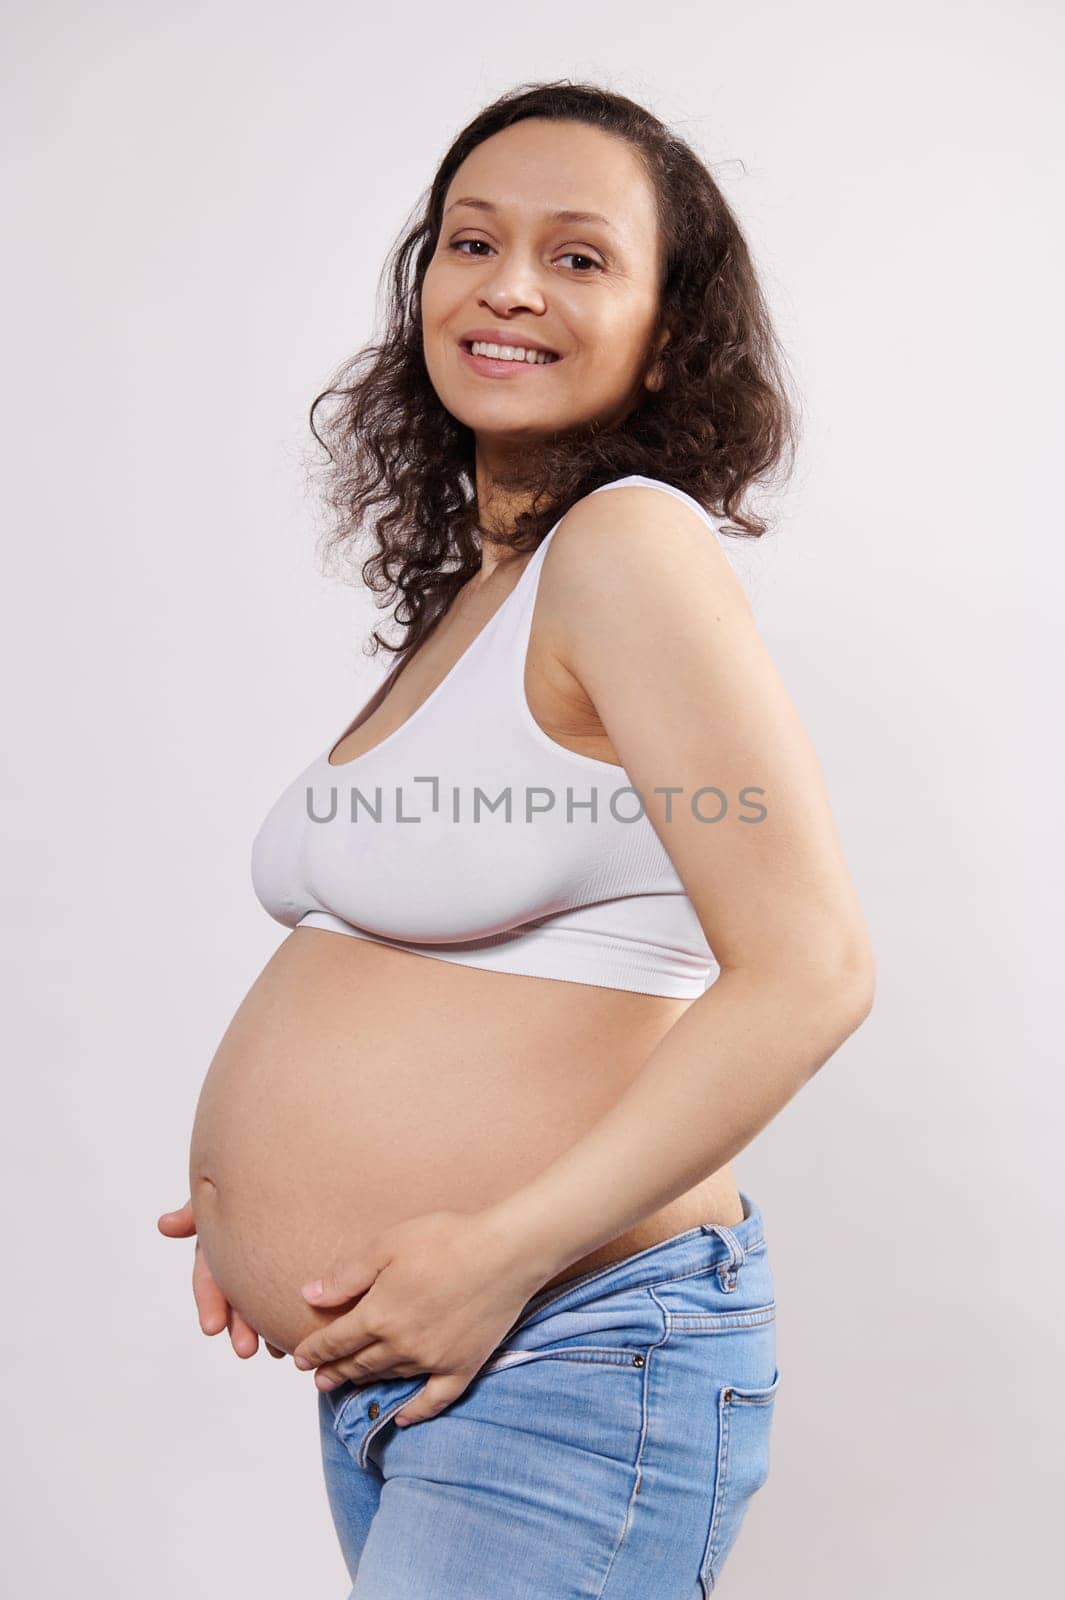 Vertical studio portrait: attractive happy pregnant multi ethnic woman holding hands on her tummy, smiling with beautiful toothy smile, looking at camera, isolated white background. Pregnancy fashion